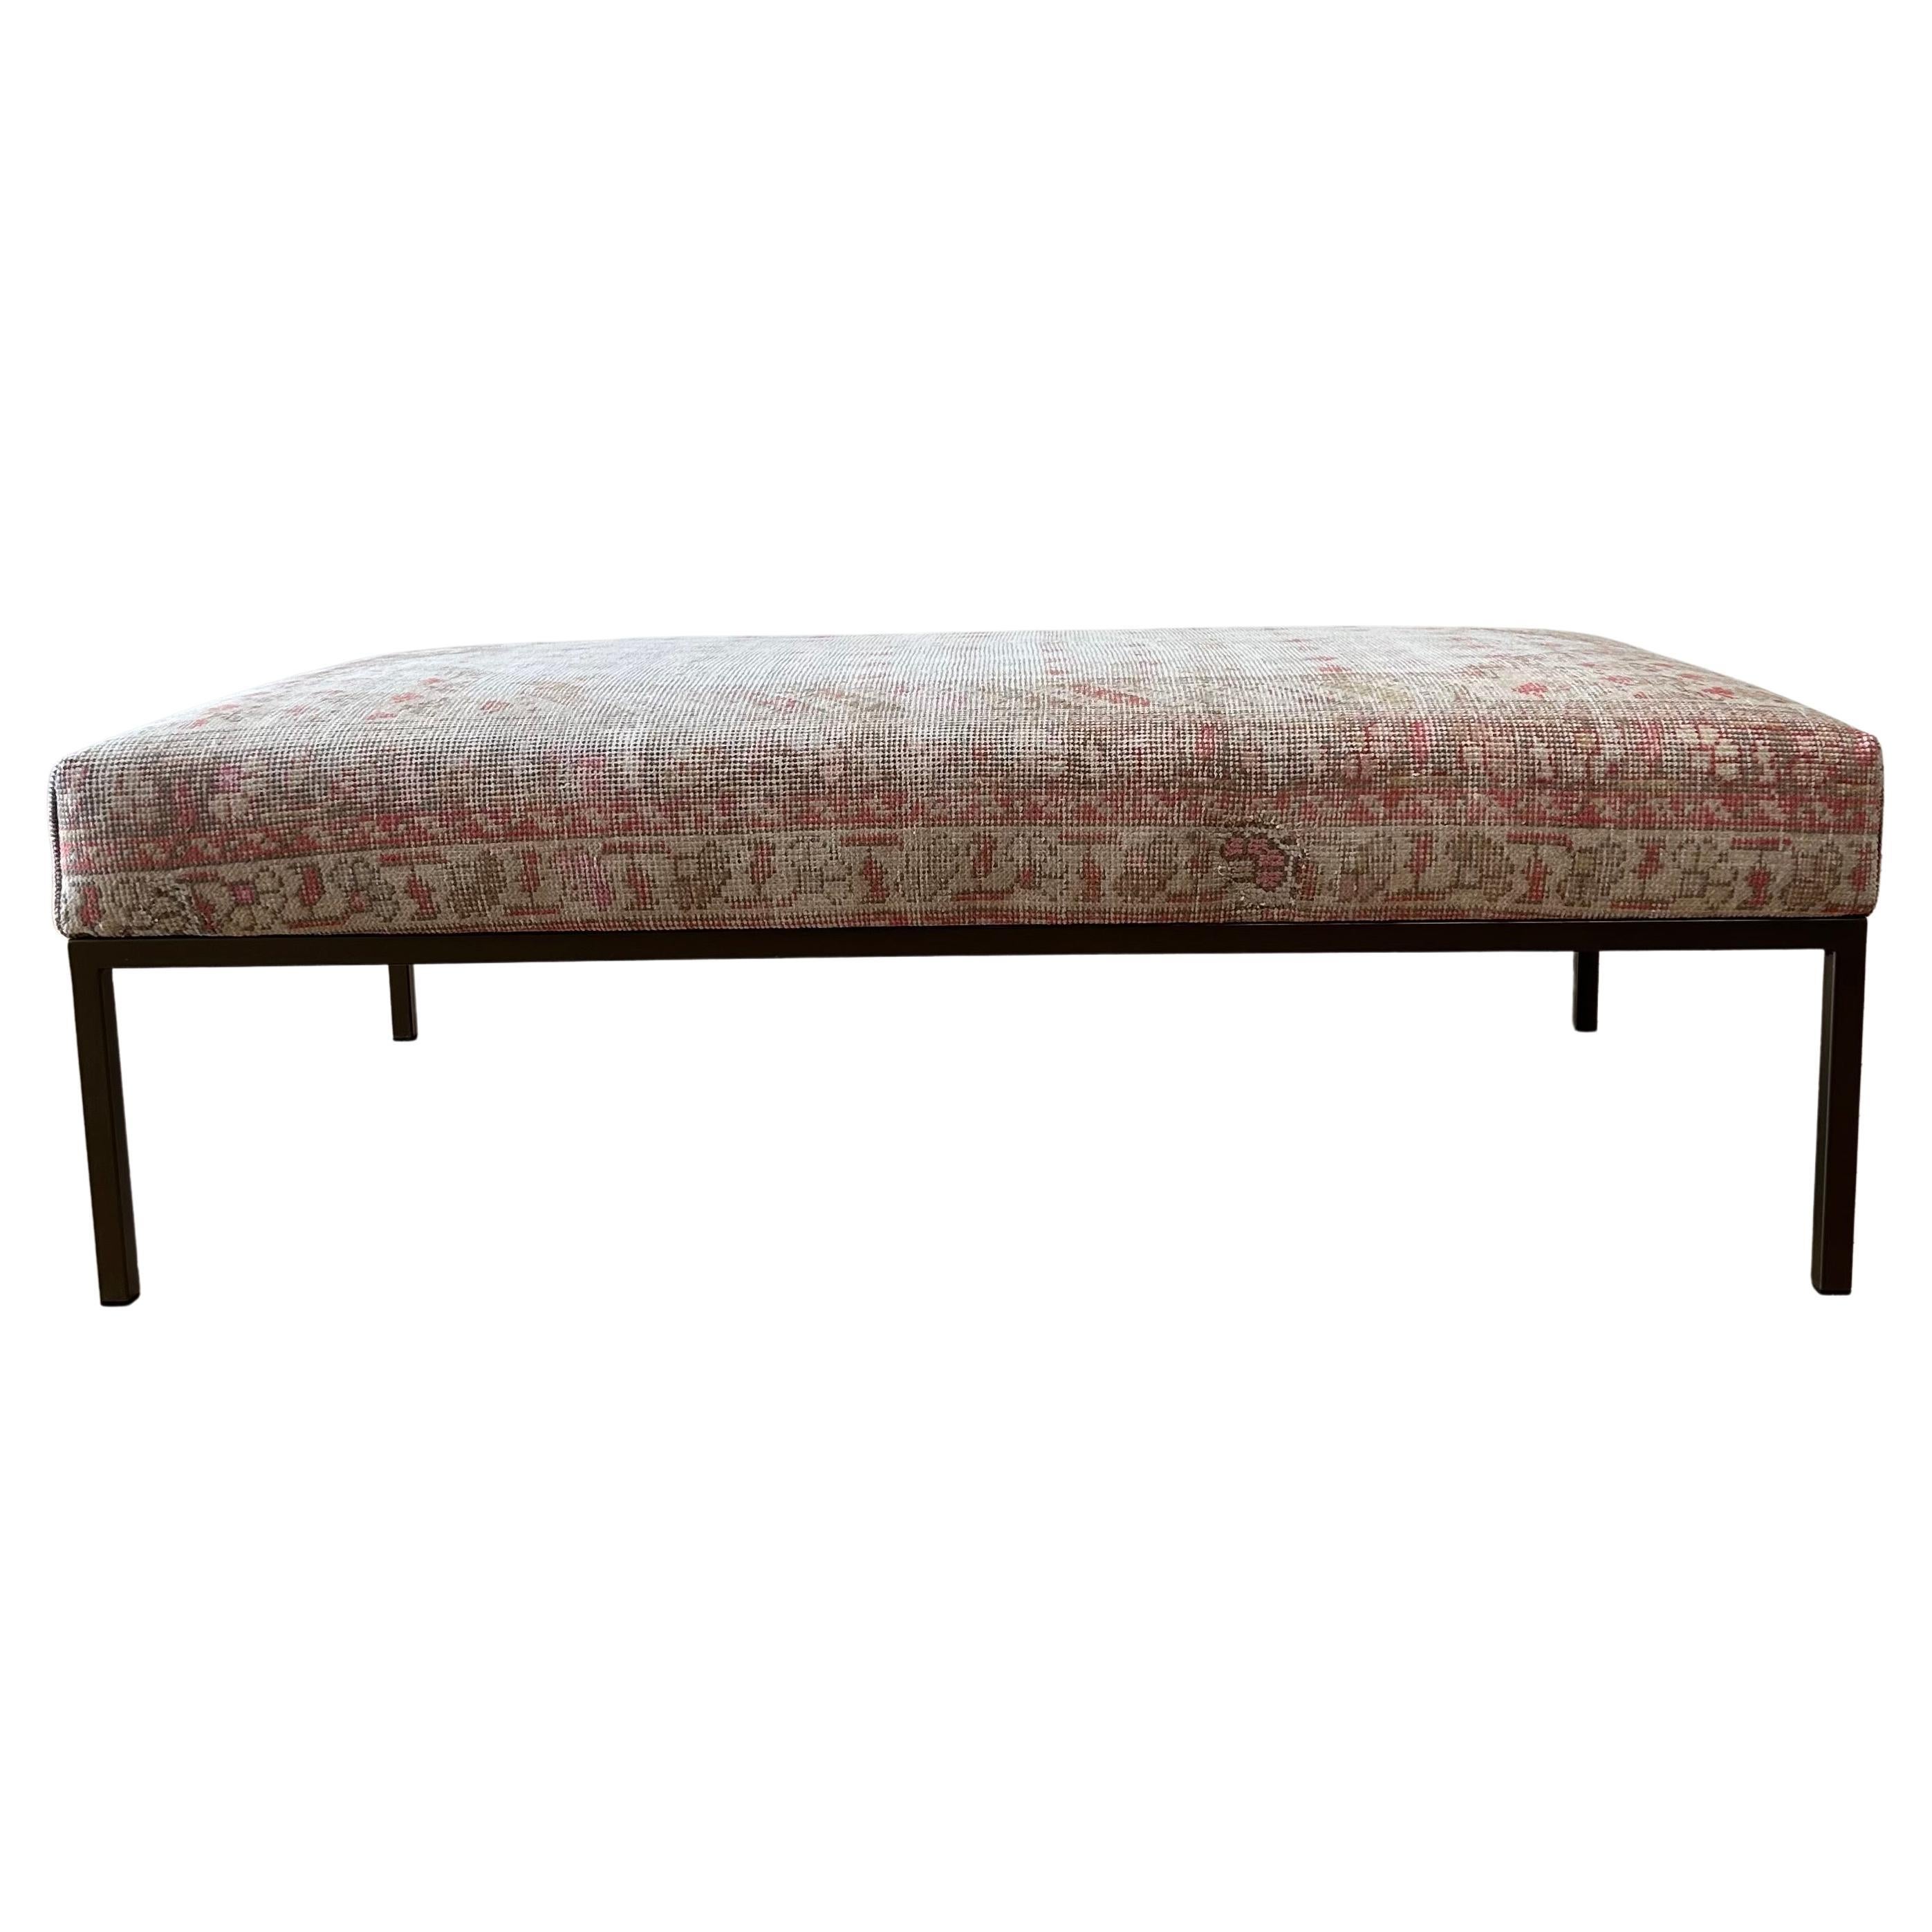 Custom Made Iron Base Upholstered Ottoman or Bench from Vintage Turkish Rug For Sale